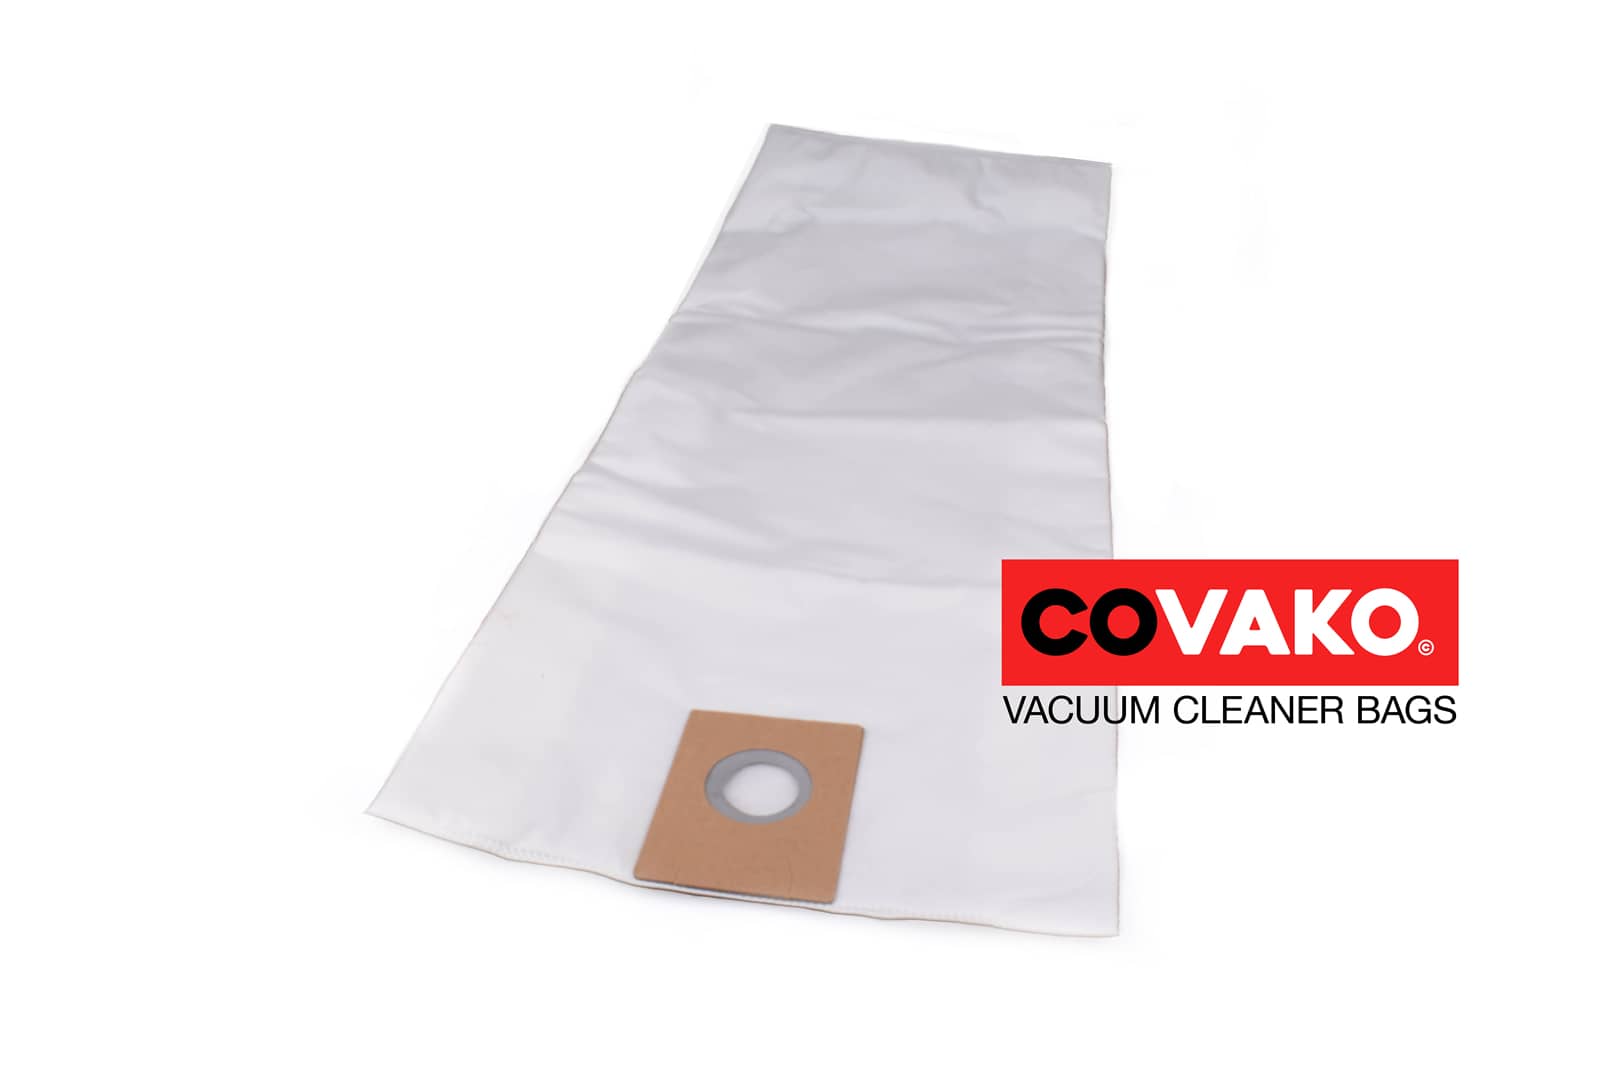 Viper LSU 275 P / Synthesis - Viper vacuum cleaner bags